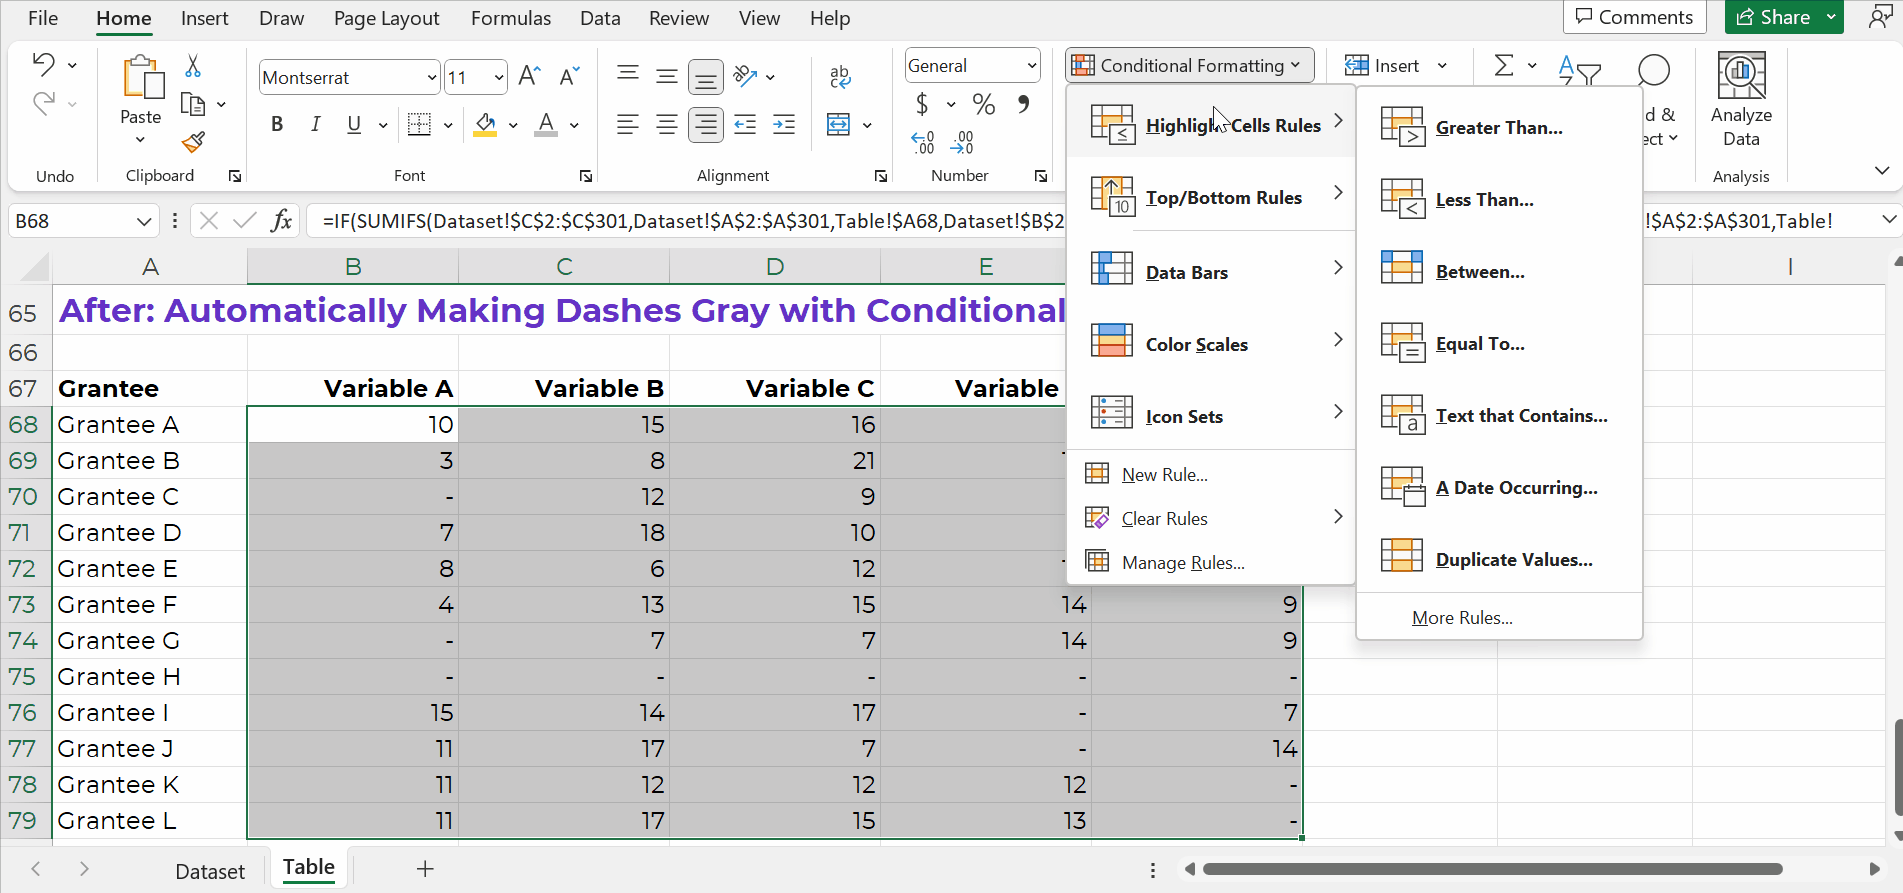 A GIF showing how to apply Conditional Formatting in Excel.